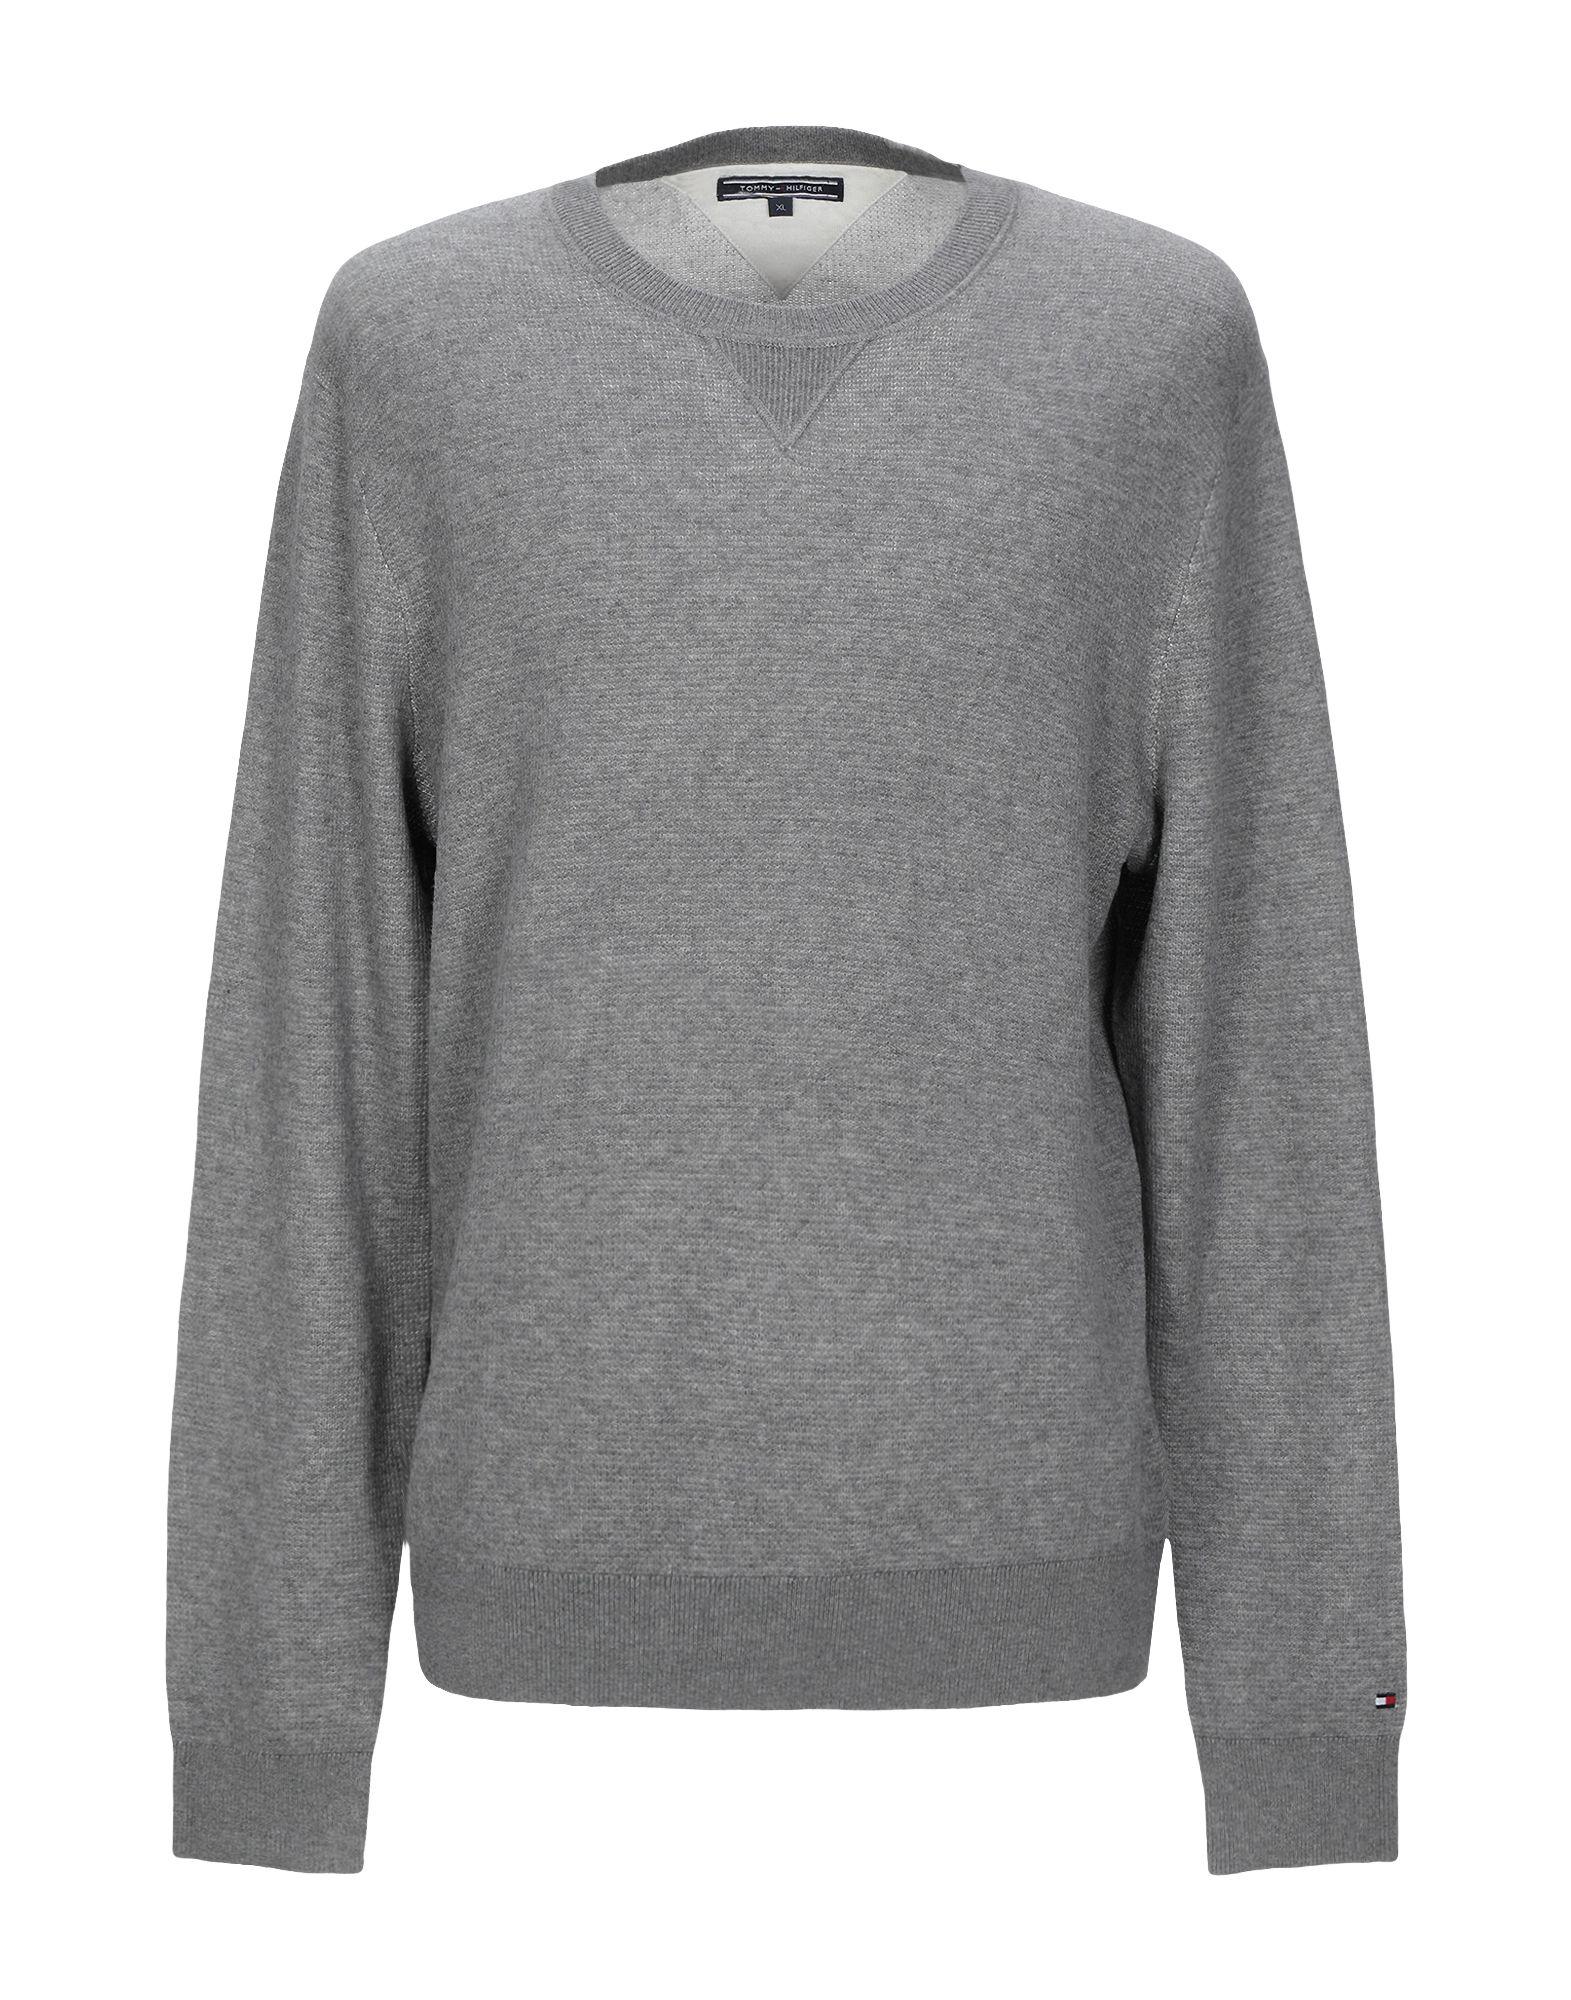 Tommy Hilfiger Cotton Sweater in Grey (Gray) for Men - Lyst